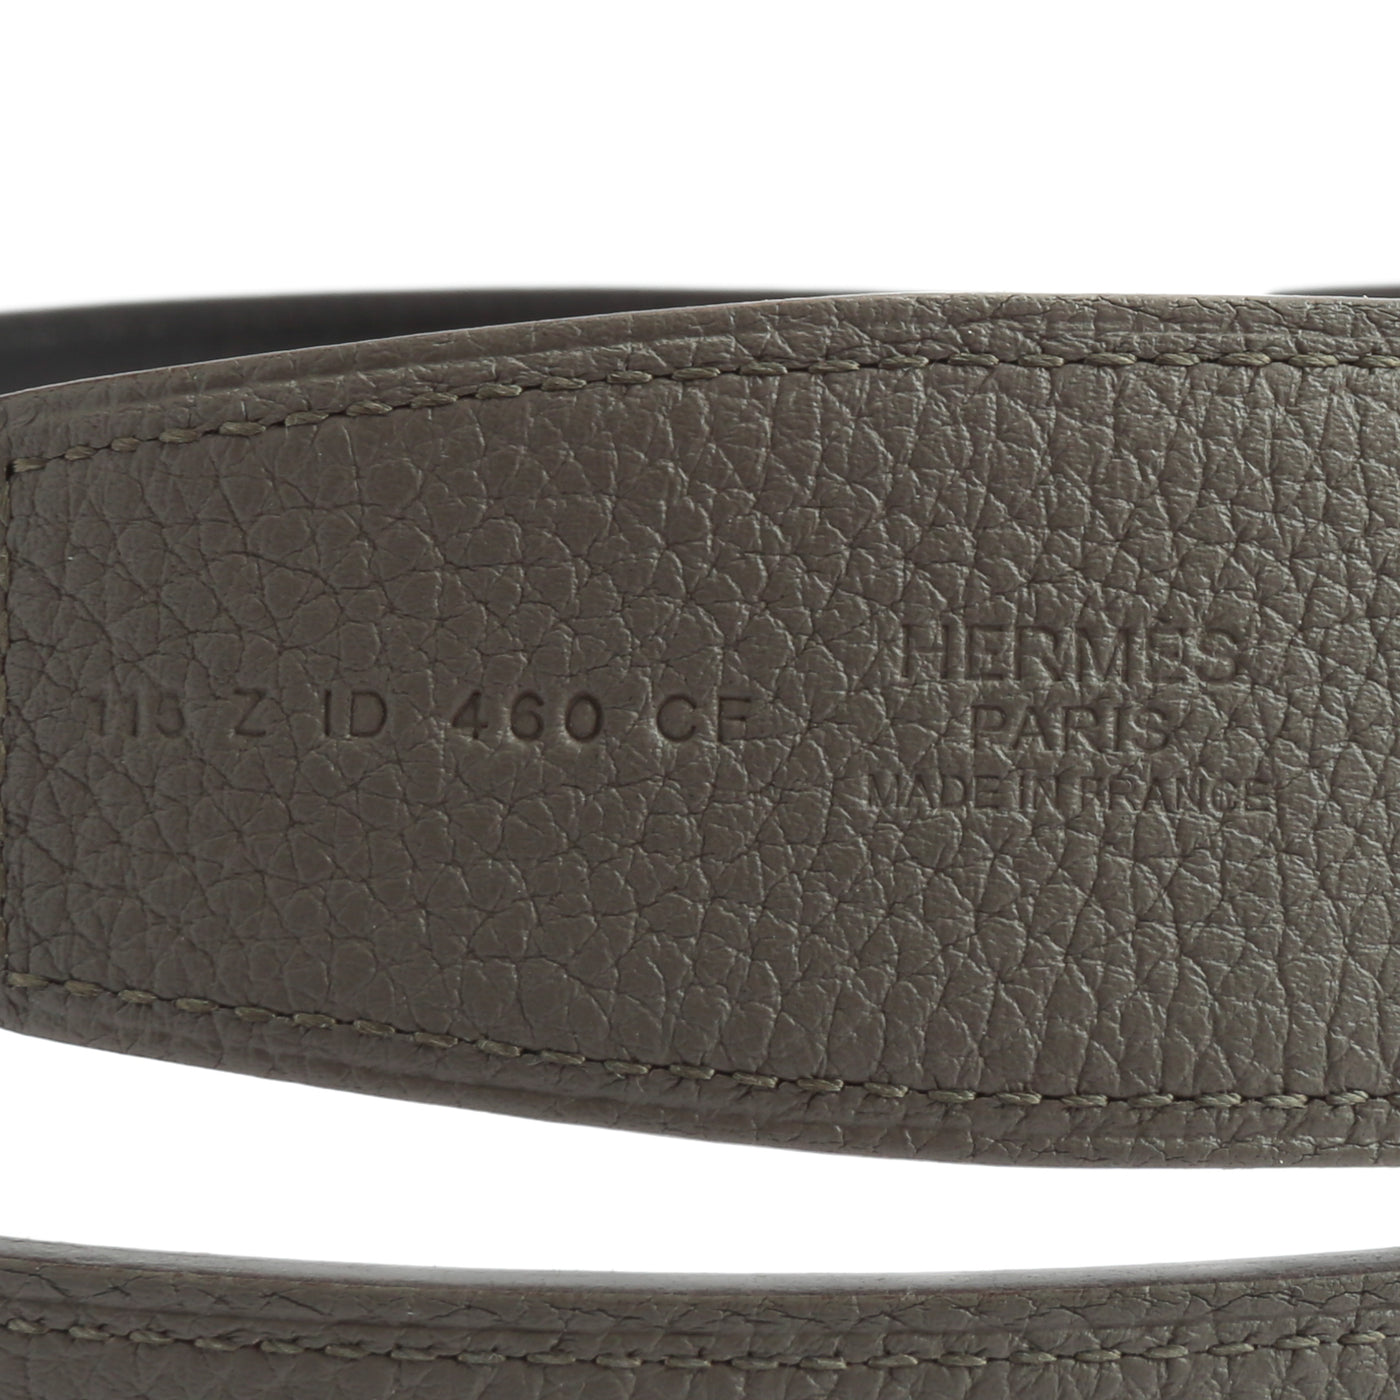 HERMES 38MM Veau/Togo Leather Strap Black/Grey with Constance 38MM Silver Buckle